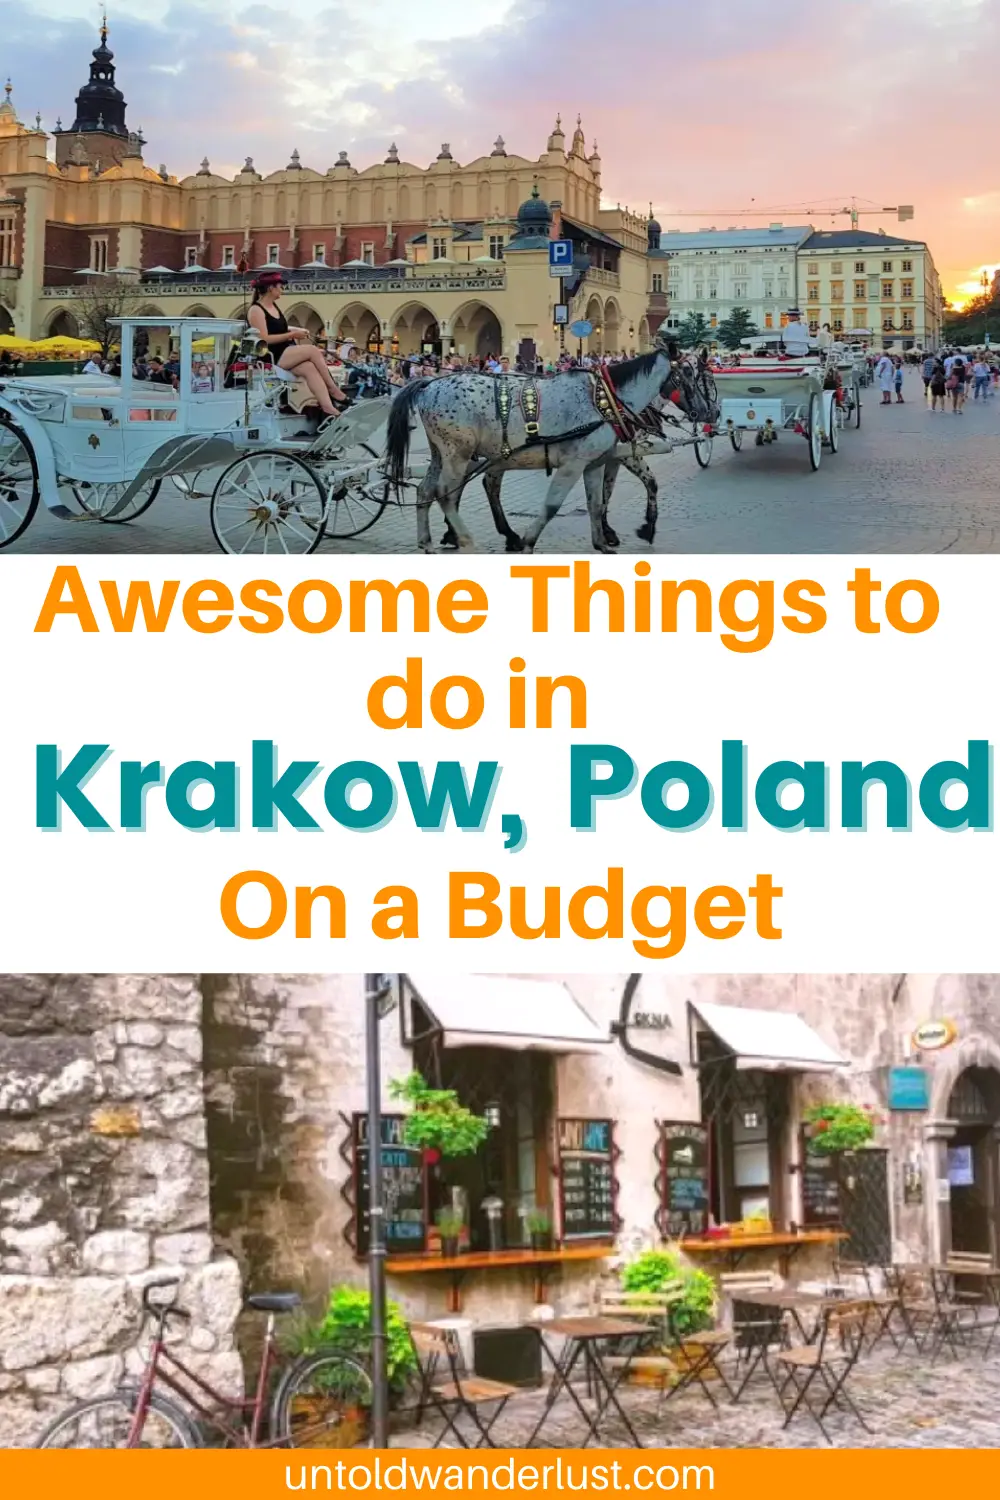 Awesome Things to do in Krakow, Poland on a Budget